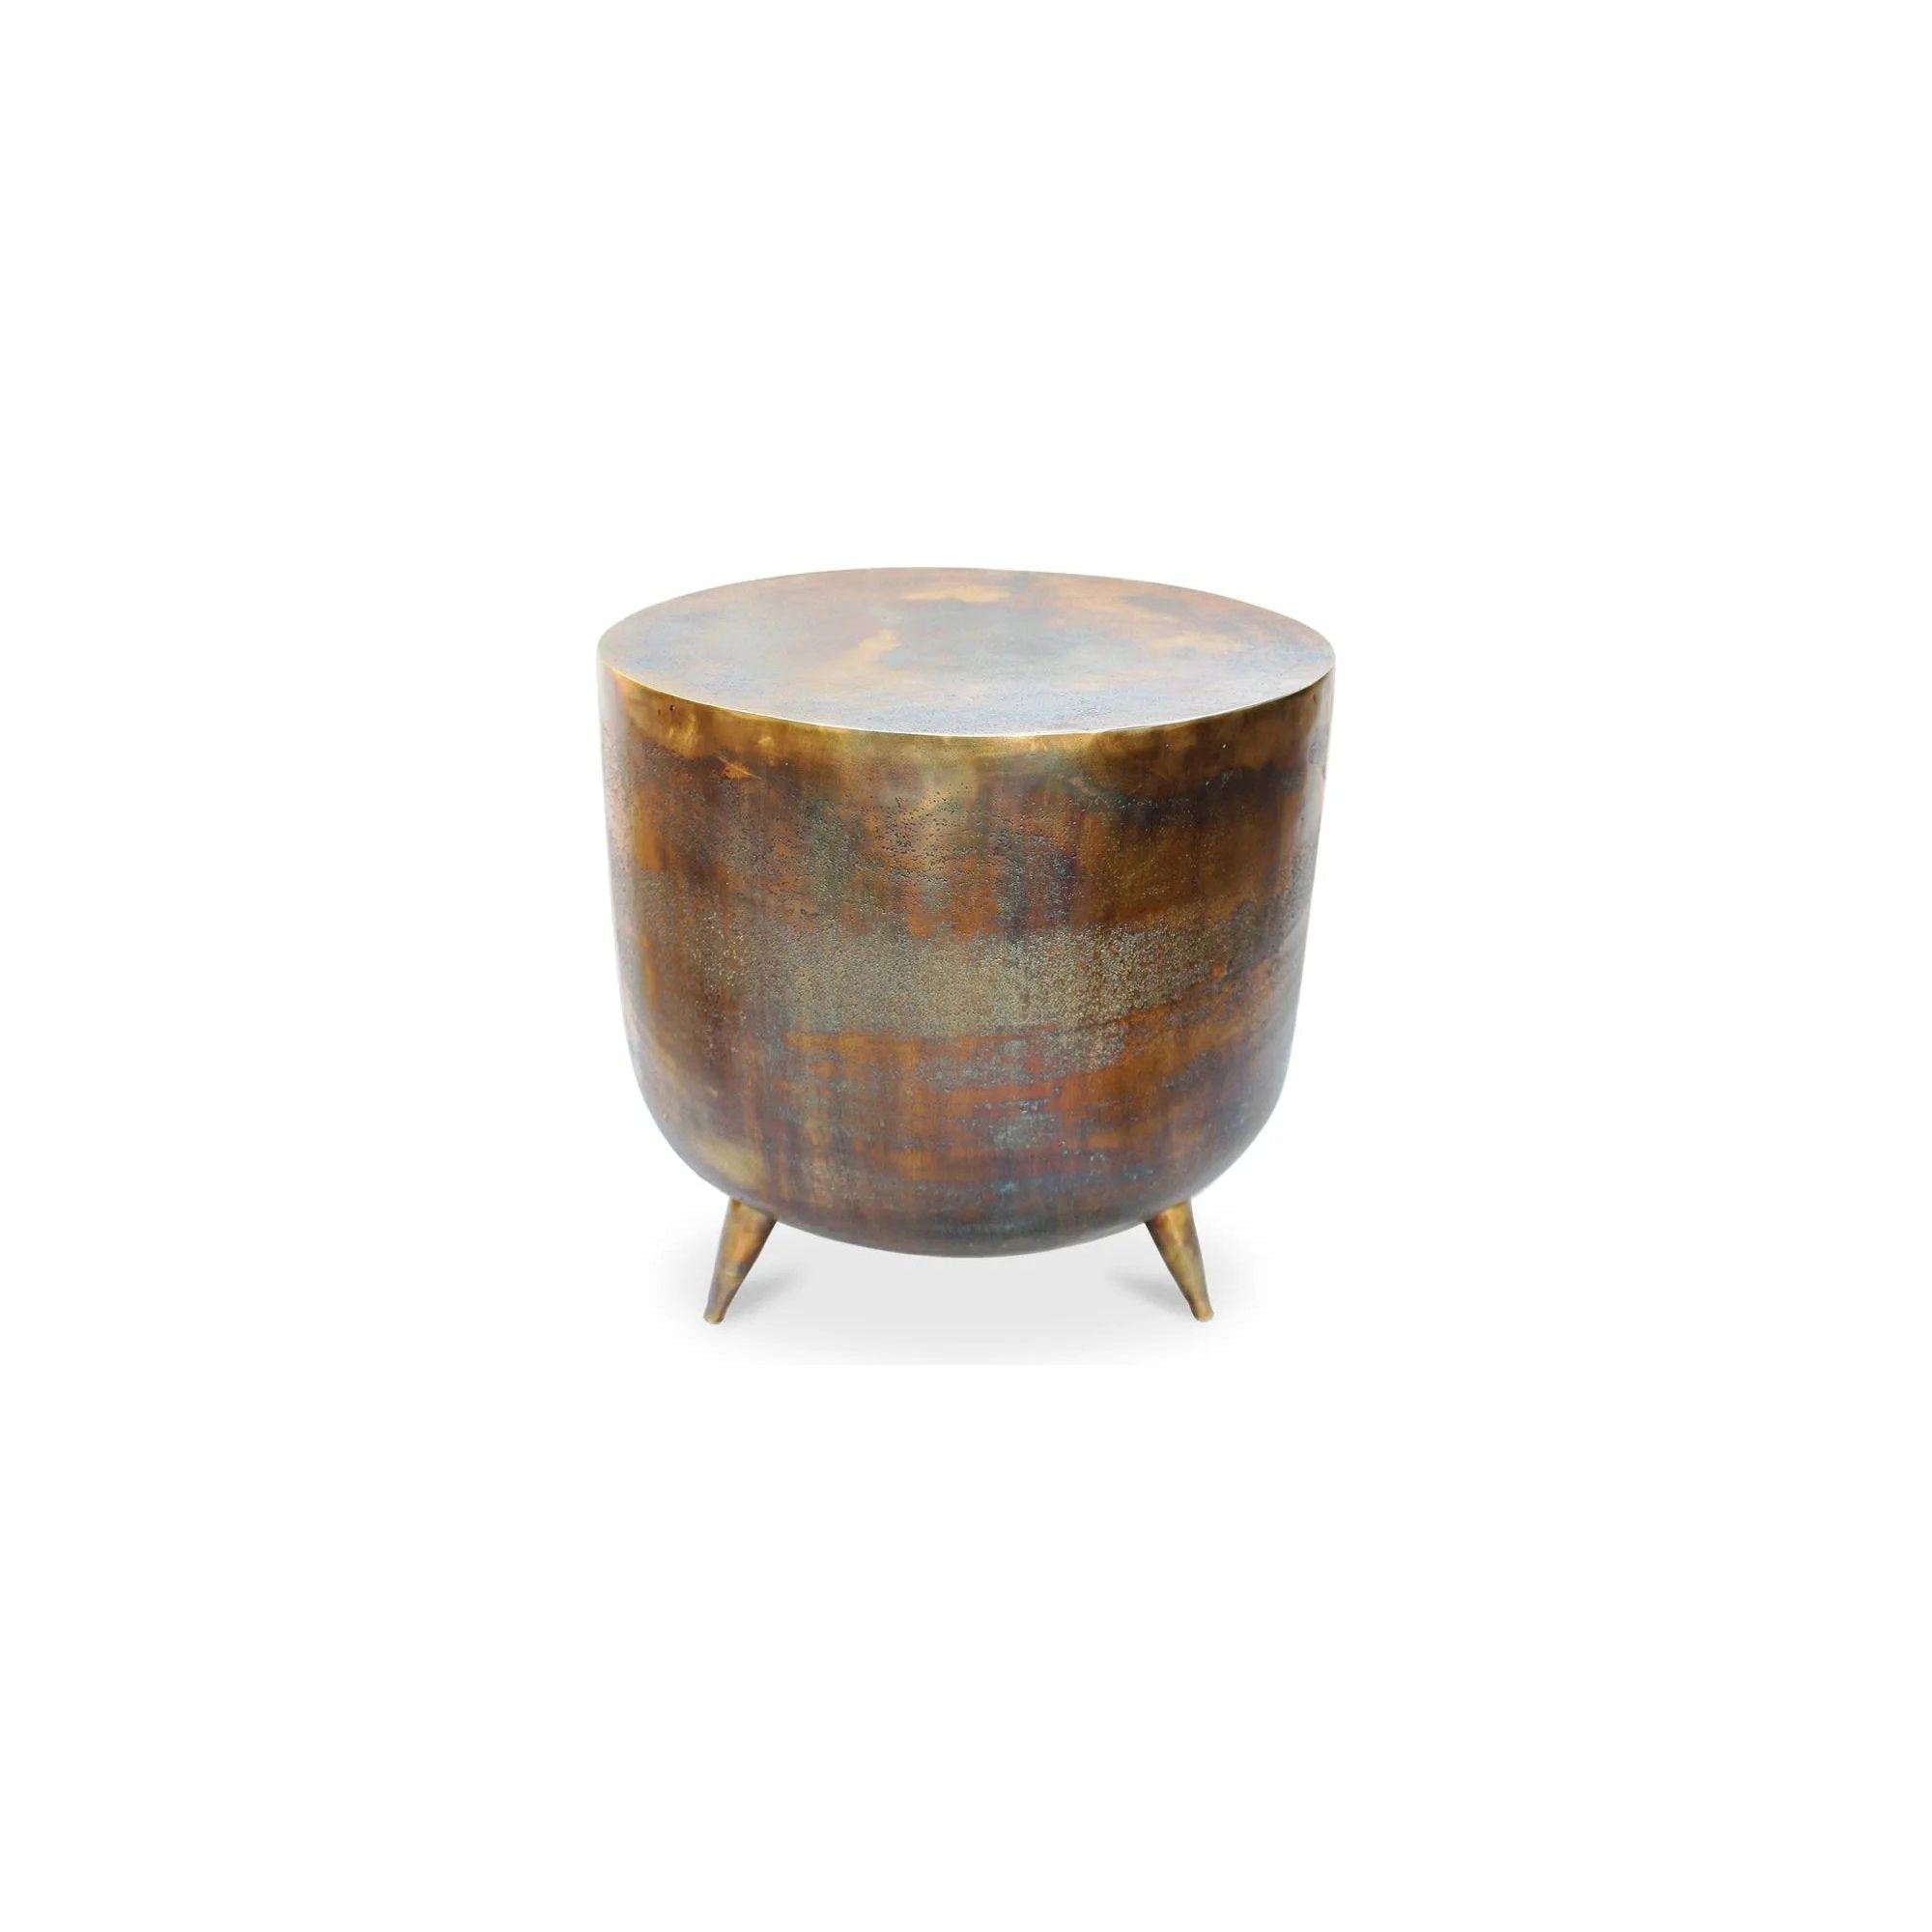 A unique accent table that is bound to make an impact on your Décor. With tones of gold and copper, this drum-style table provides an eclectic, designer look. Crafted in aluminum with a rustic finish Amethyst Home provides interior design, new home construction design consulting, vintage area rugs, and lighting in the San Diego metro area.